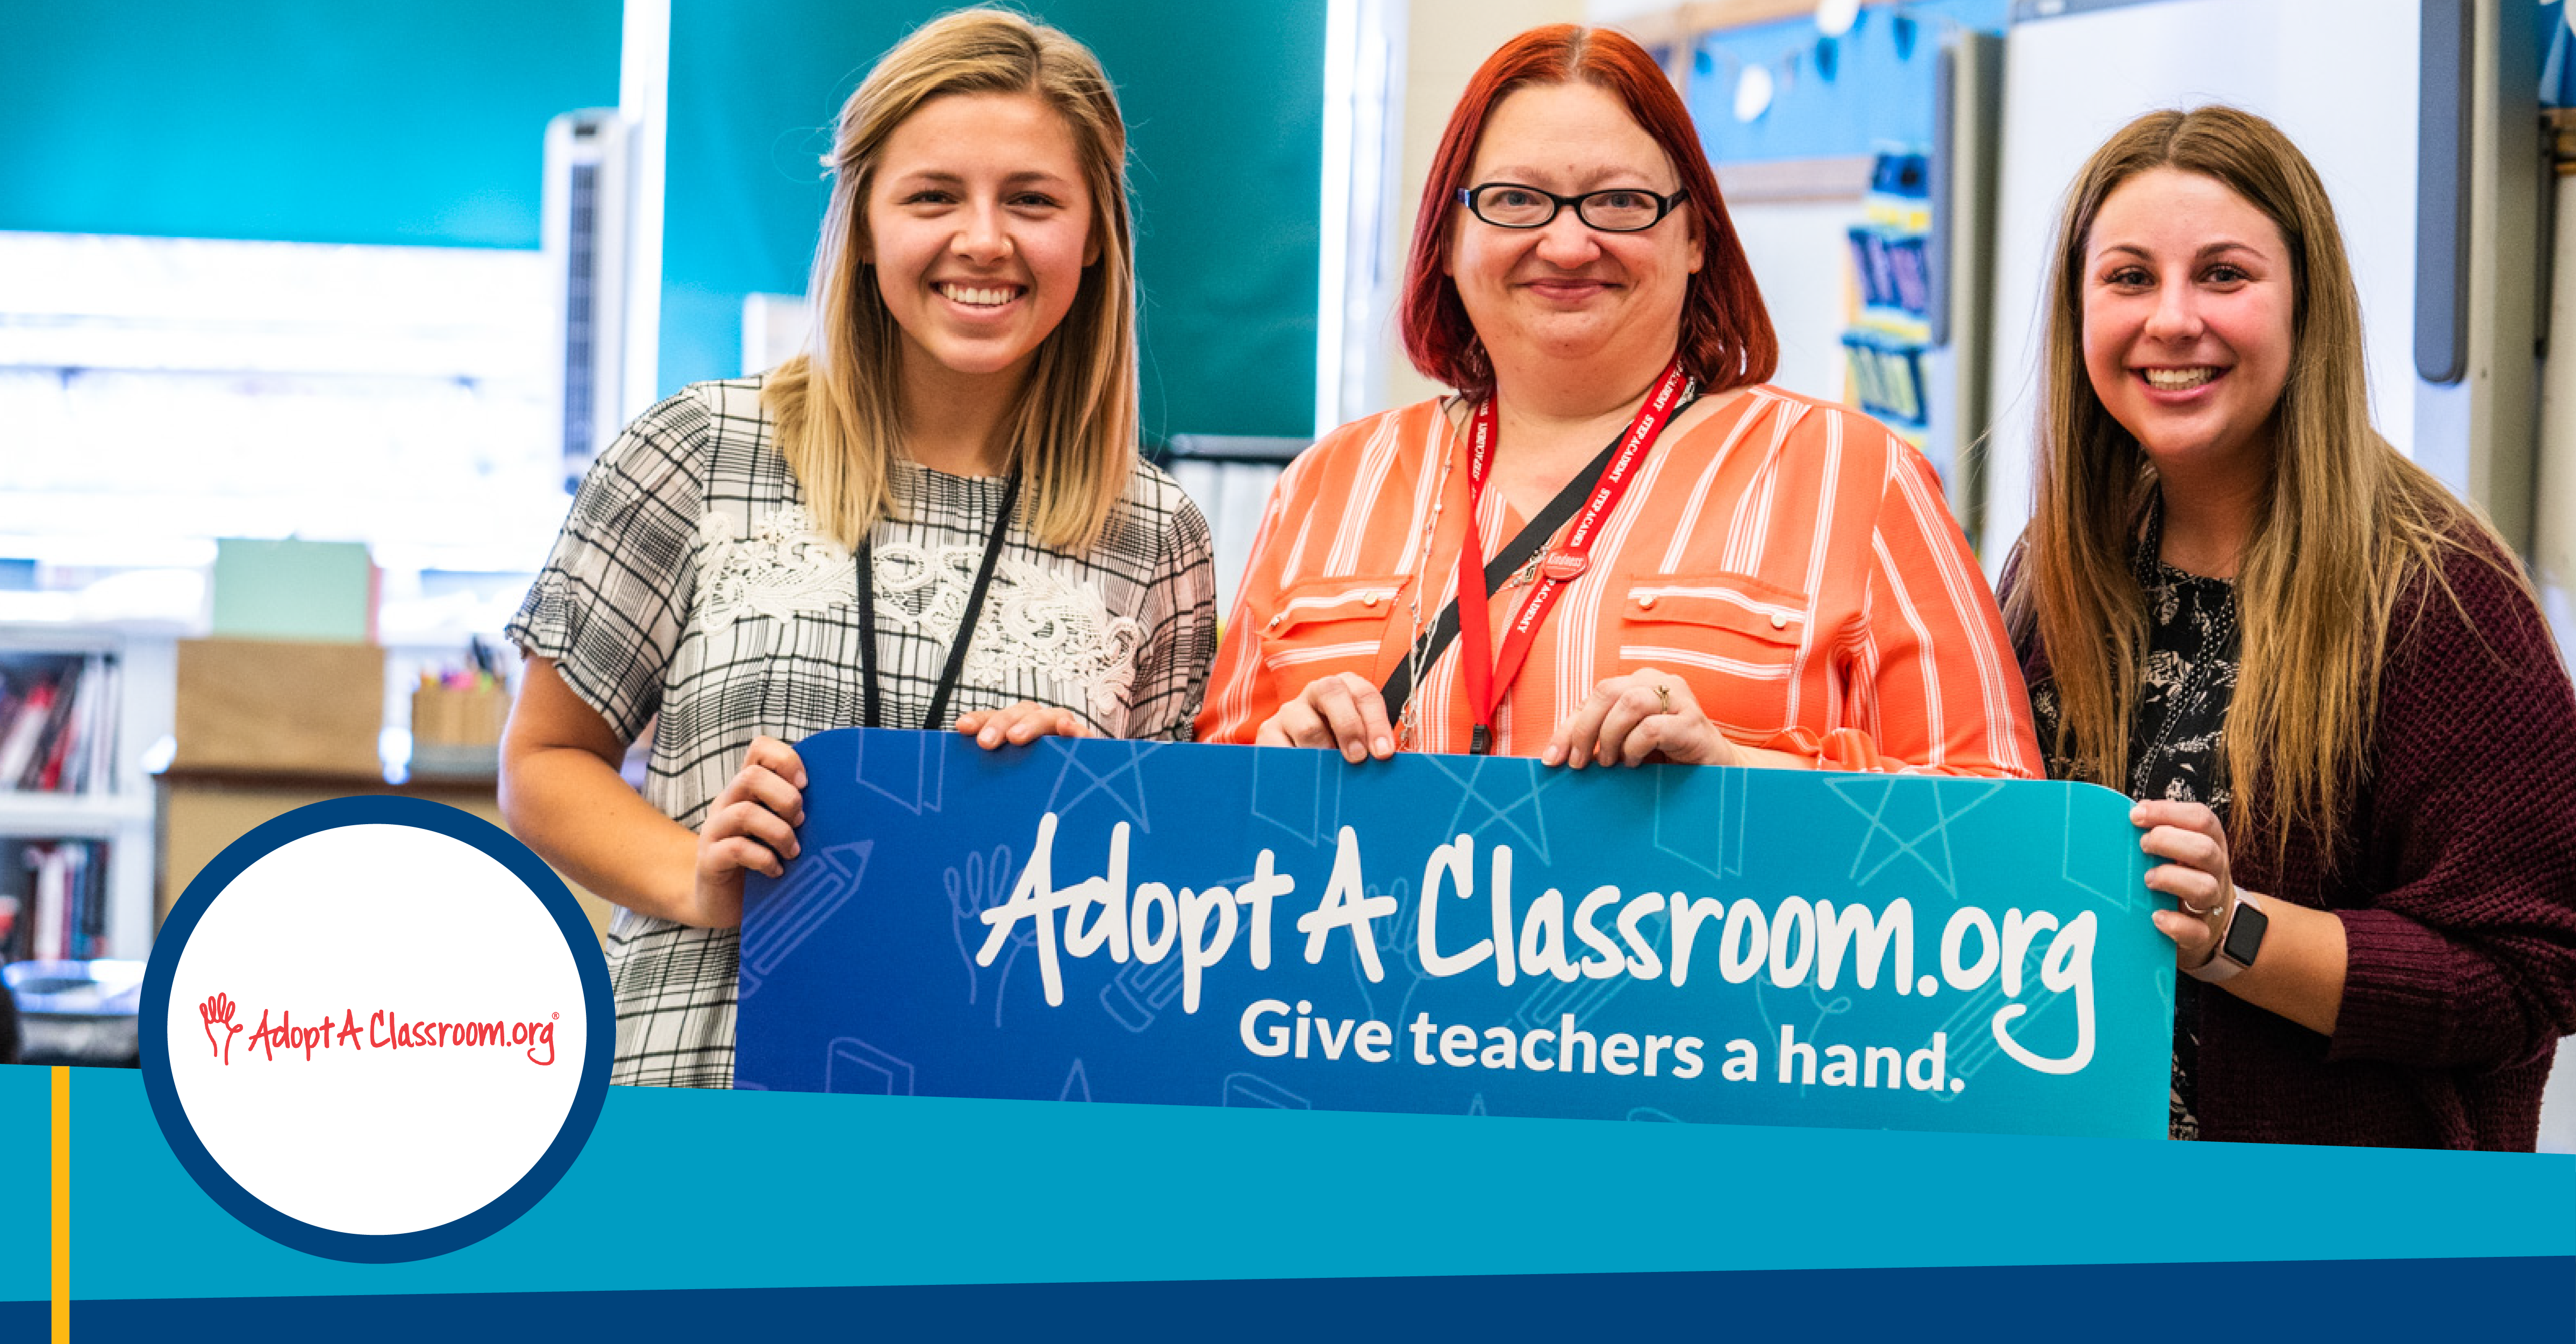 three women holding a sign that says "adoptaclassroom.org give teachers a hand"